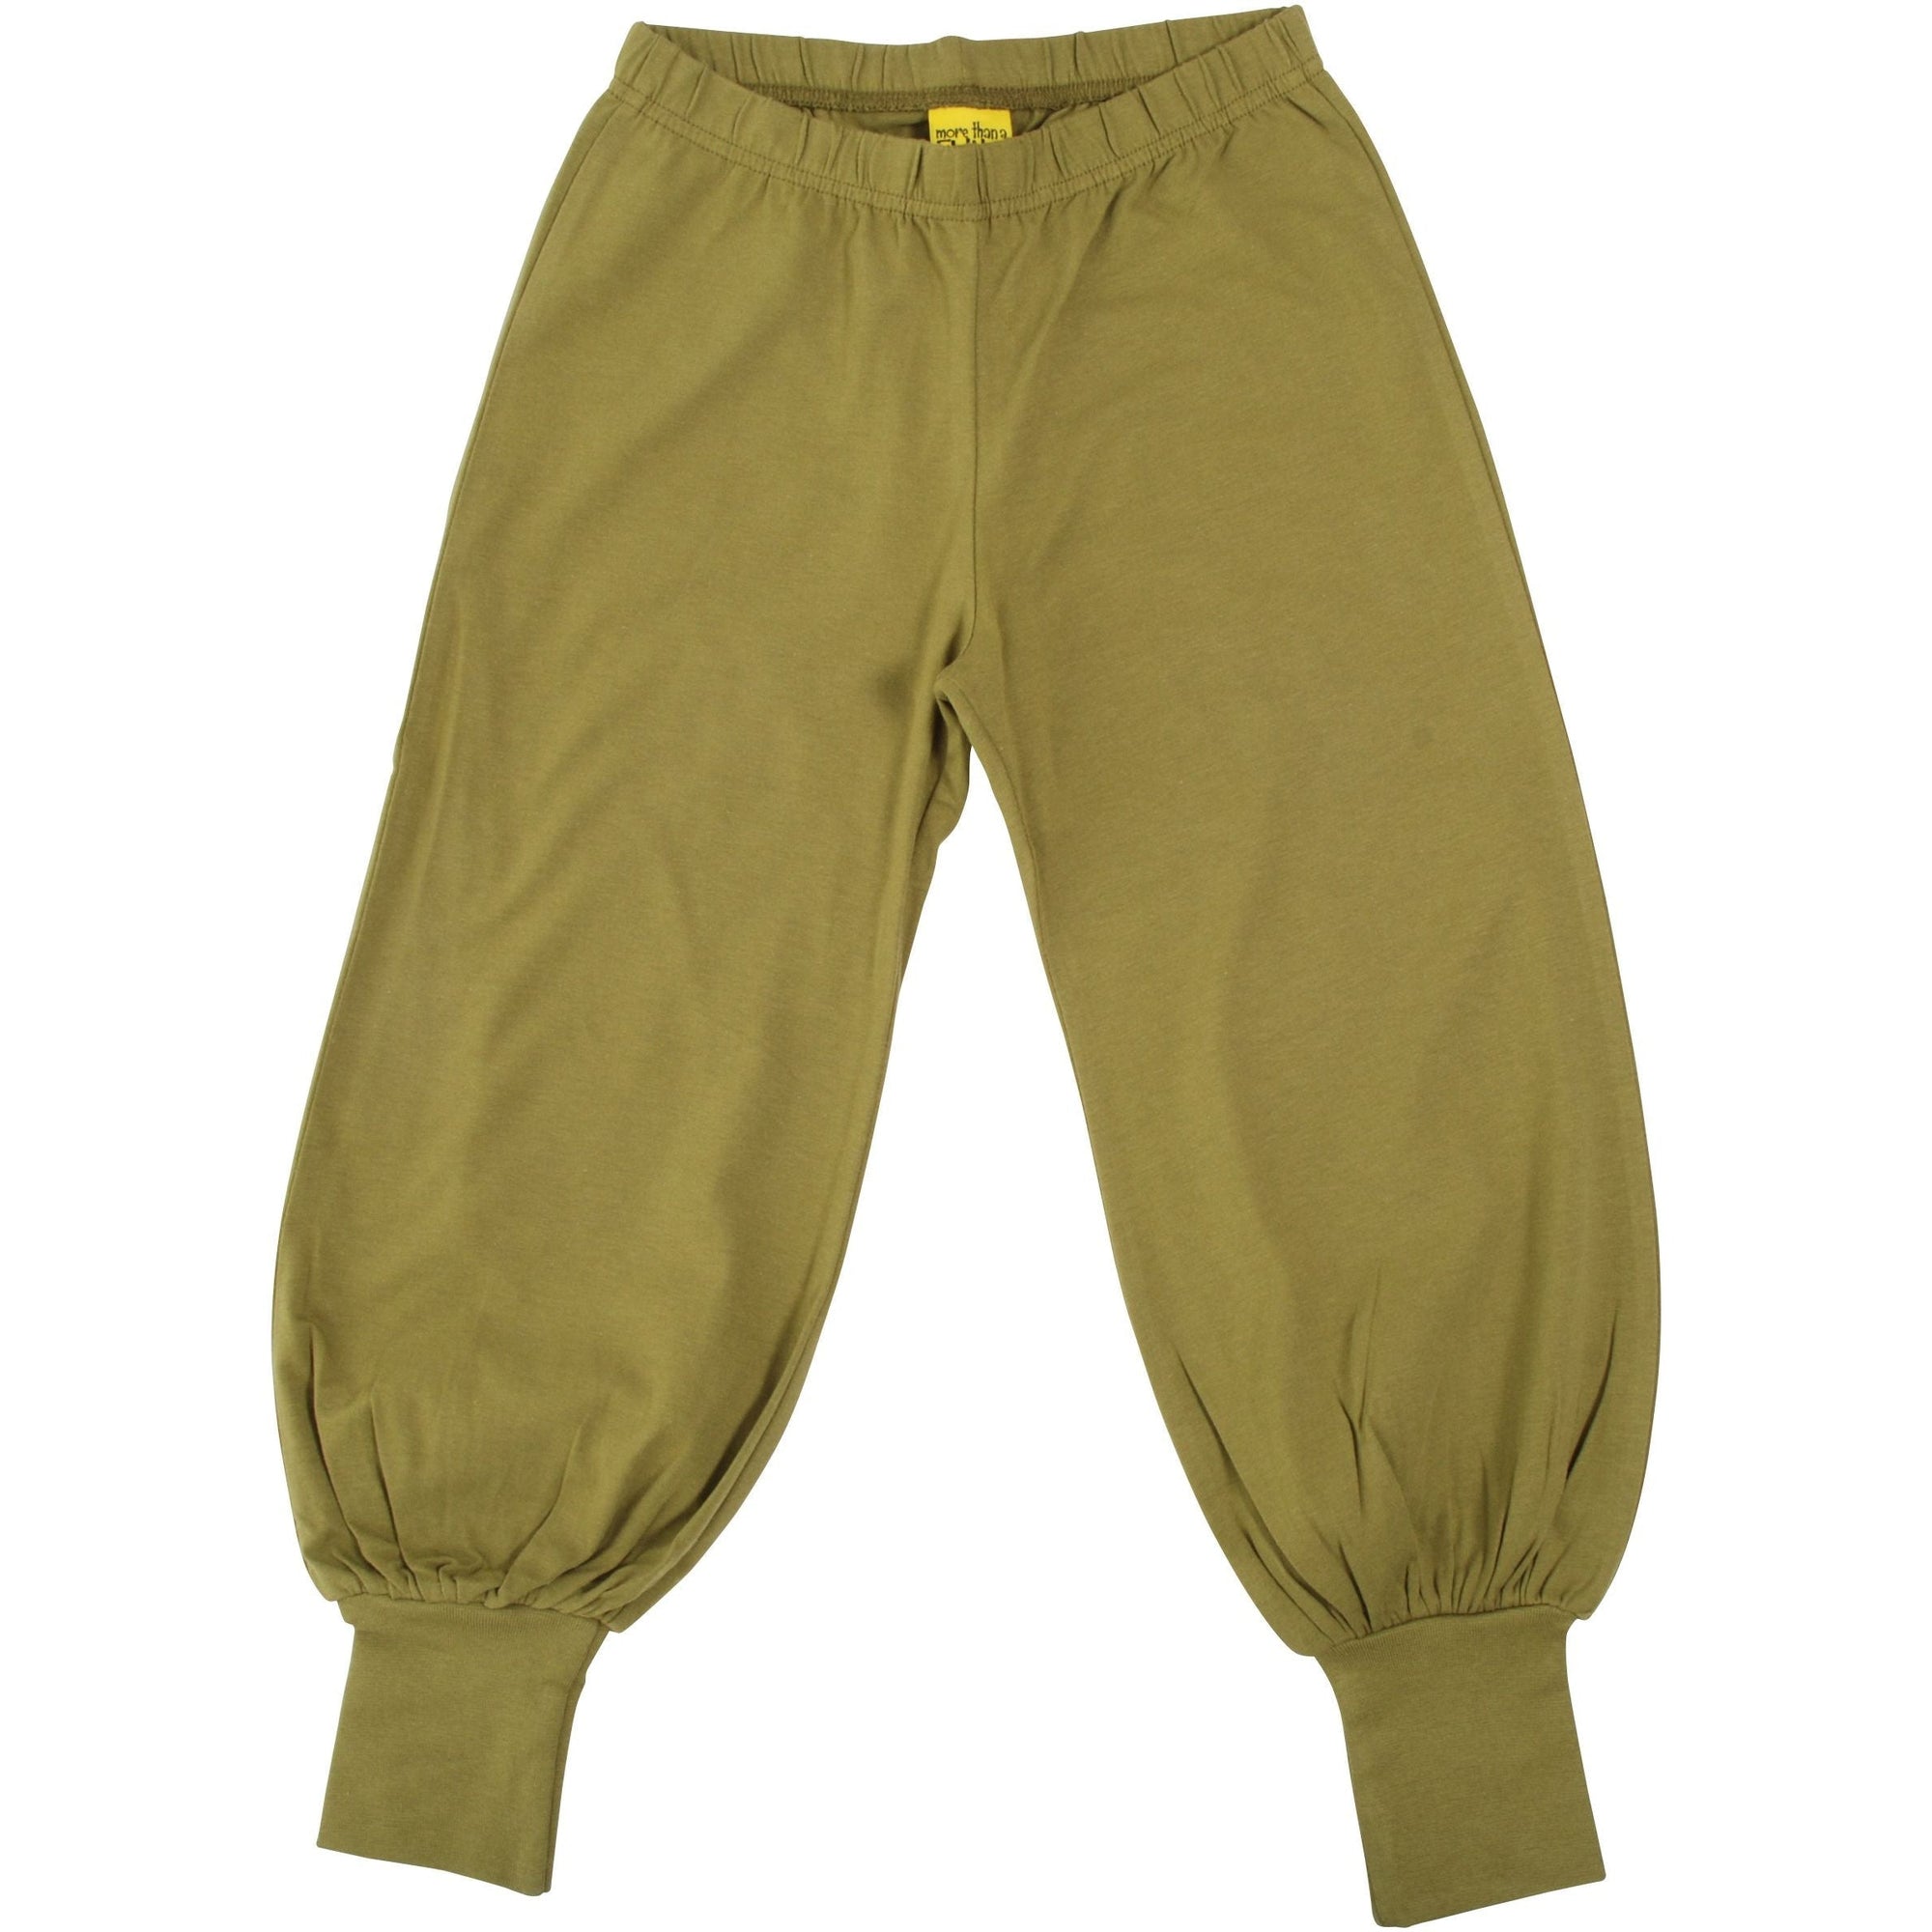 Sage Baggy Pants - 1 Left Size 10-12 years-More Than A Fling-Modern Rascals